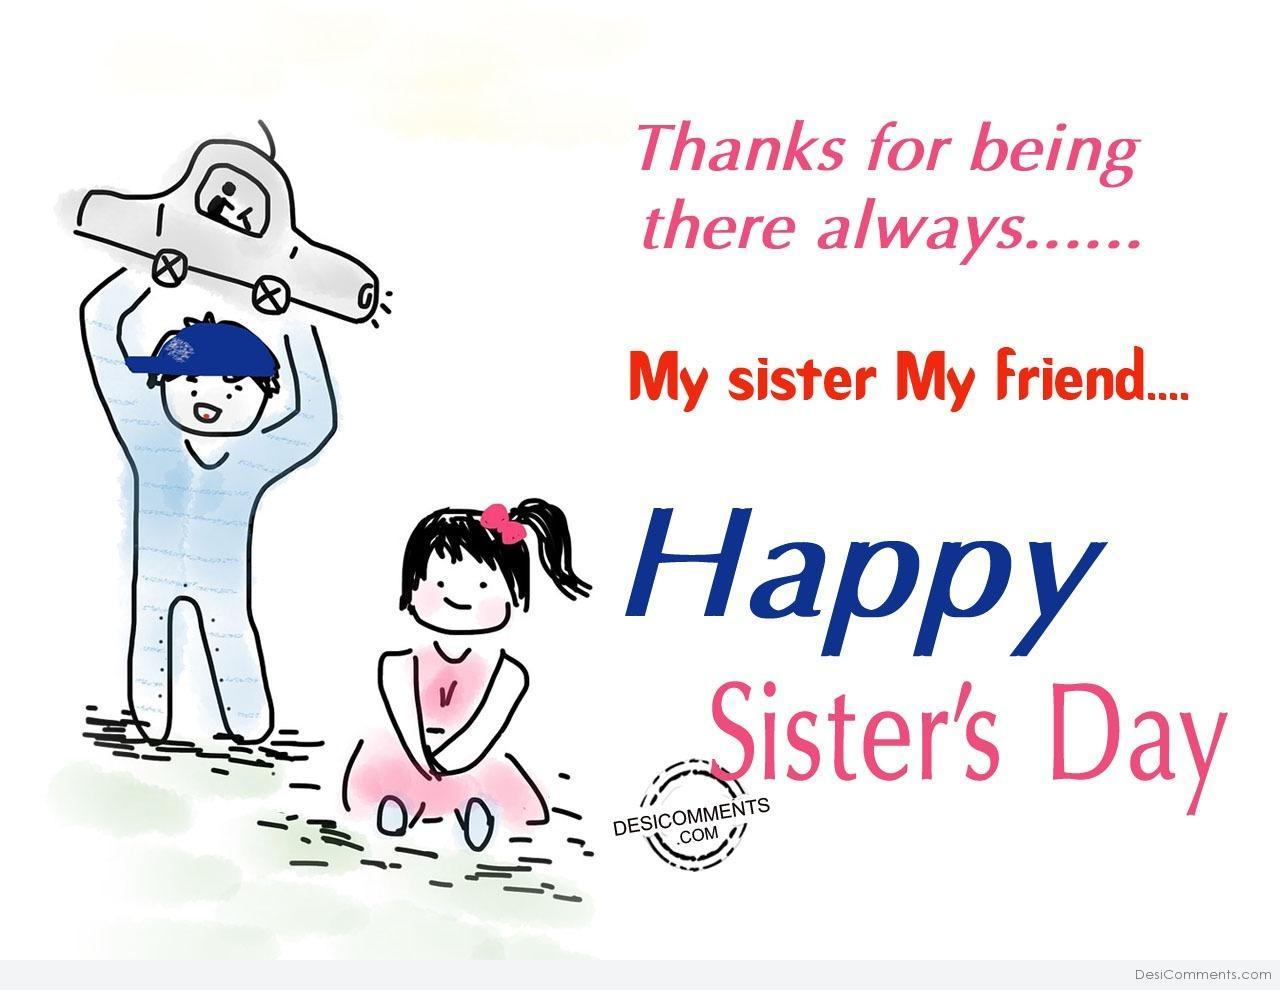 Sister's Day Picture, Image, Photo